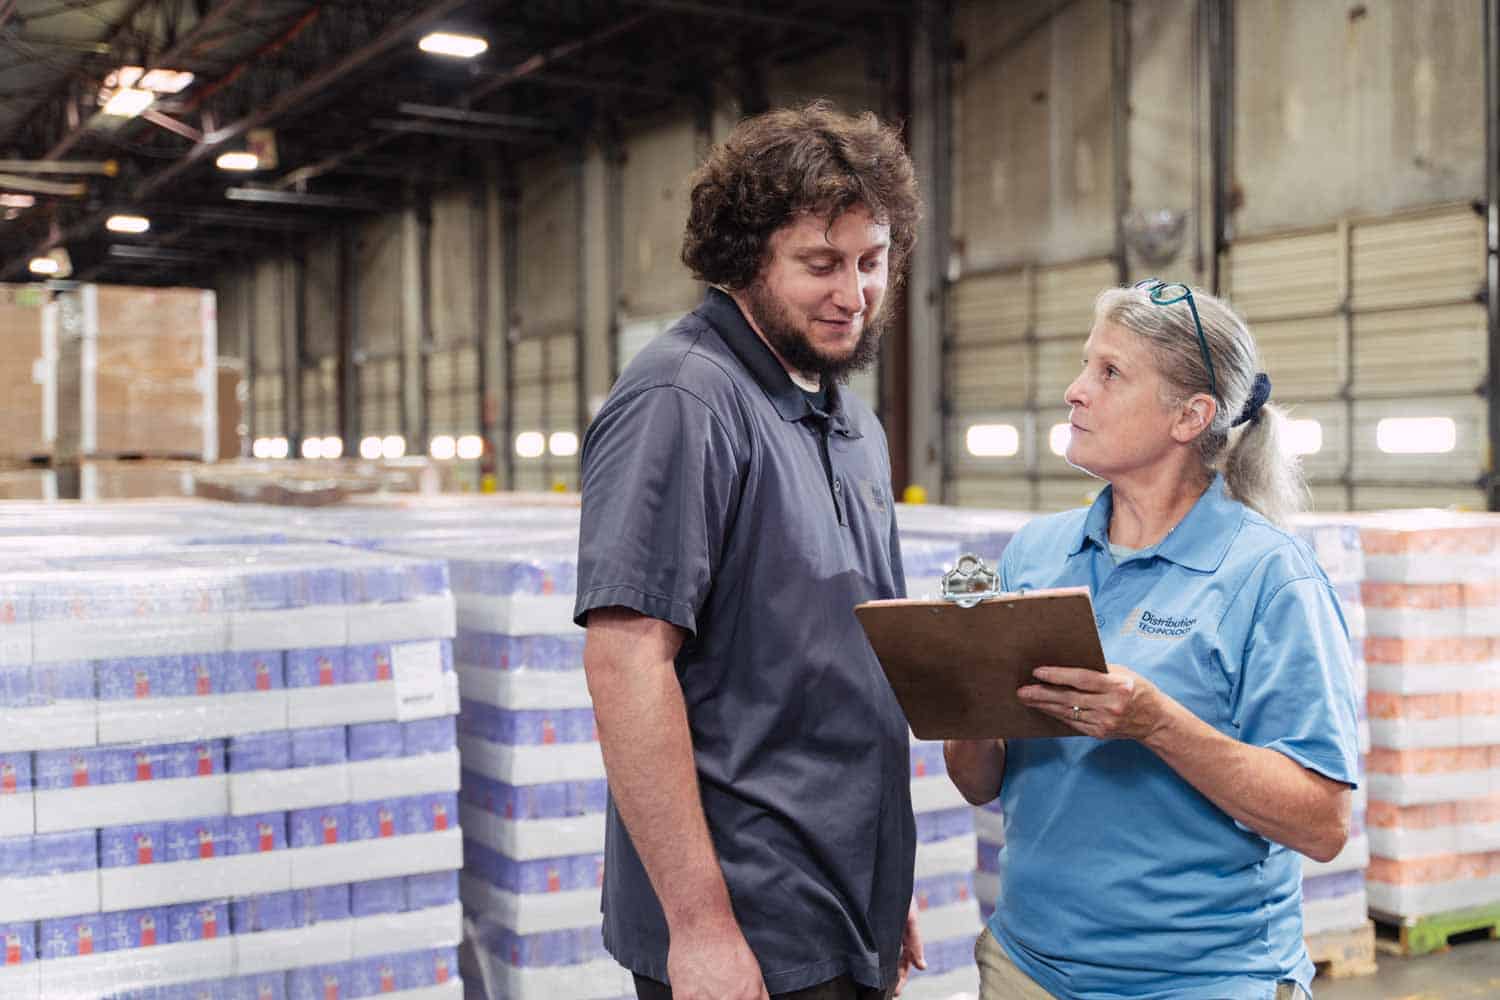 Distribution Technology value - Quality; Tall young man talk with a shorter lady with clipboard in her hand; background is warehouse